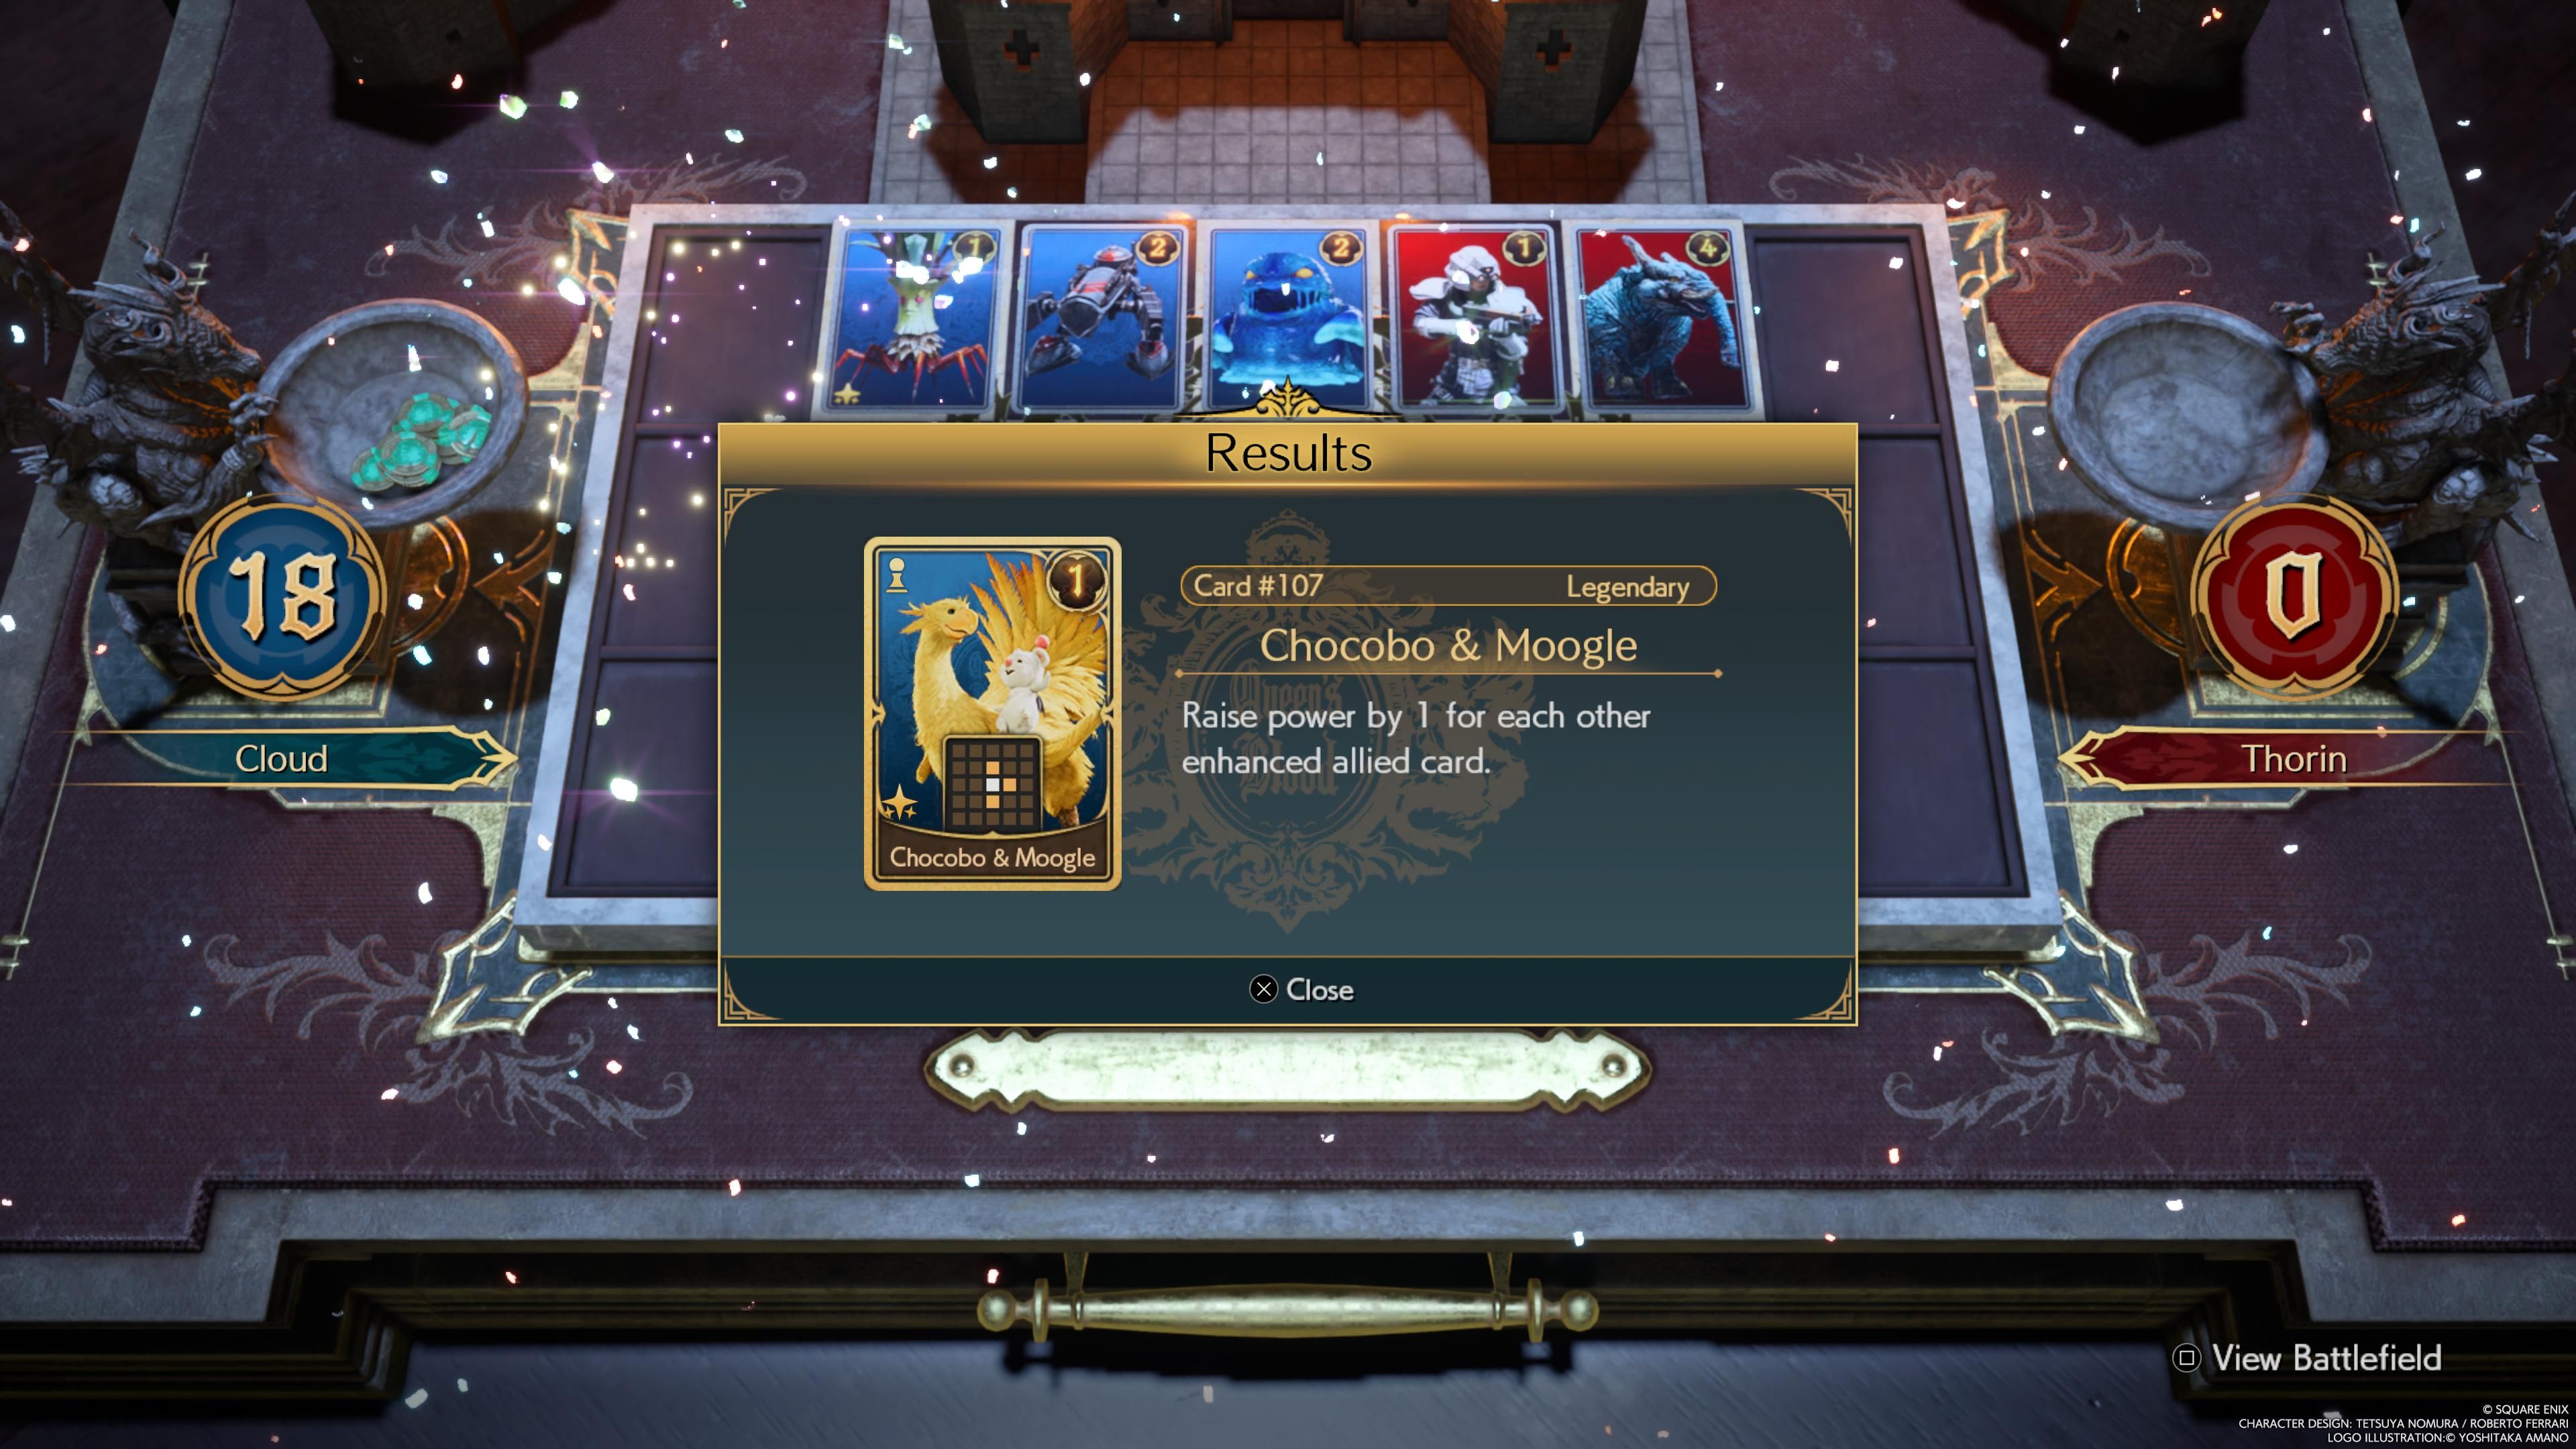 Chocobo and Moogle card as seen on the Queen’s Blood board in FF7 Rebirth